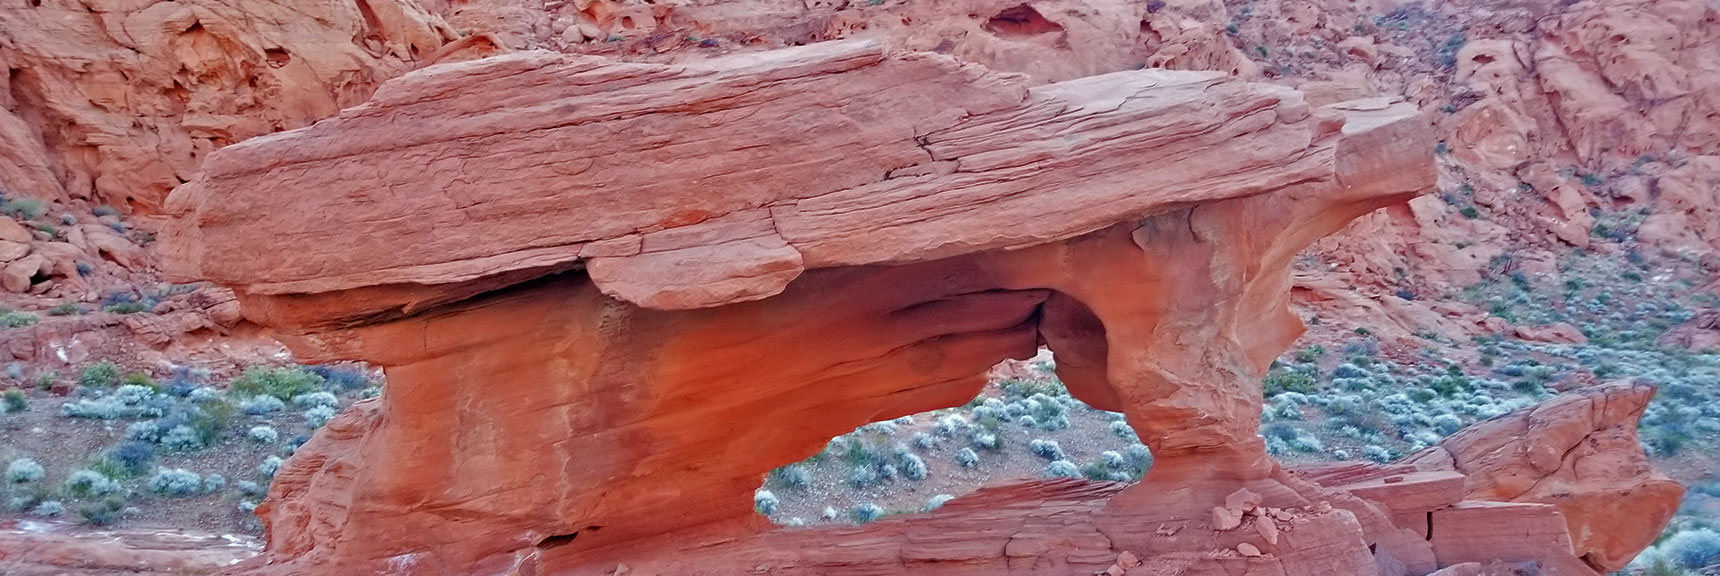 Bizarre Rock Formations in the Pass on Prospect Trail in Valley of Fire State Park, Nevada